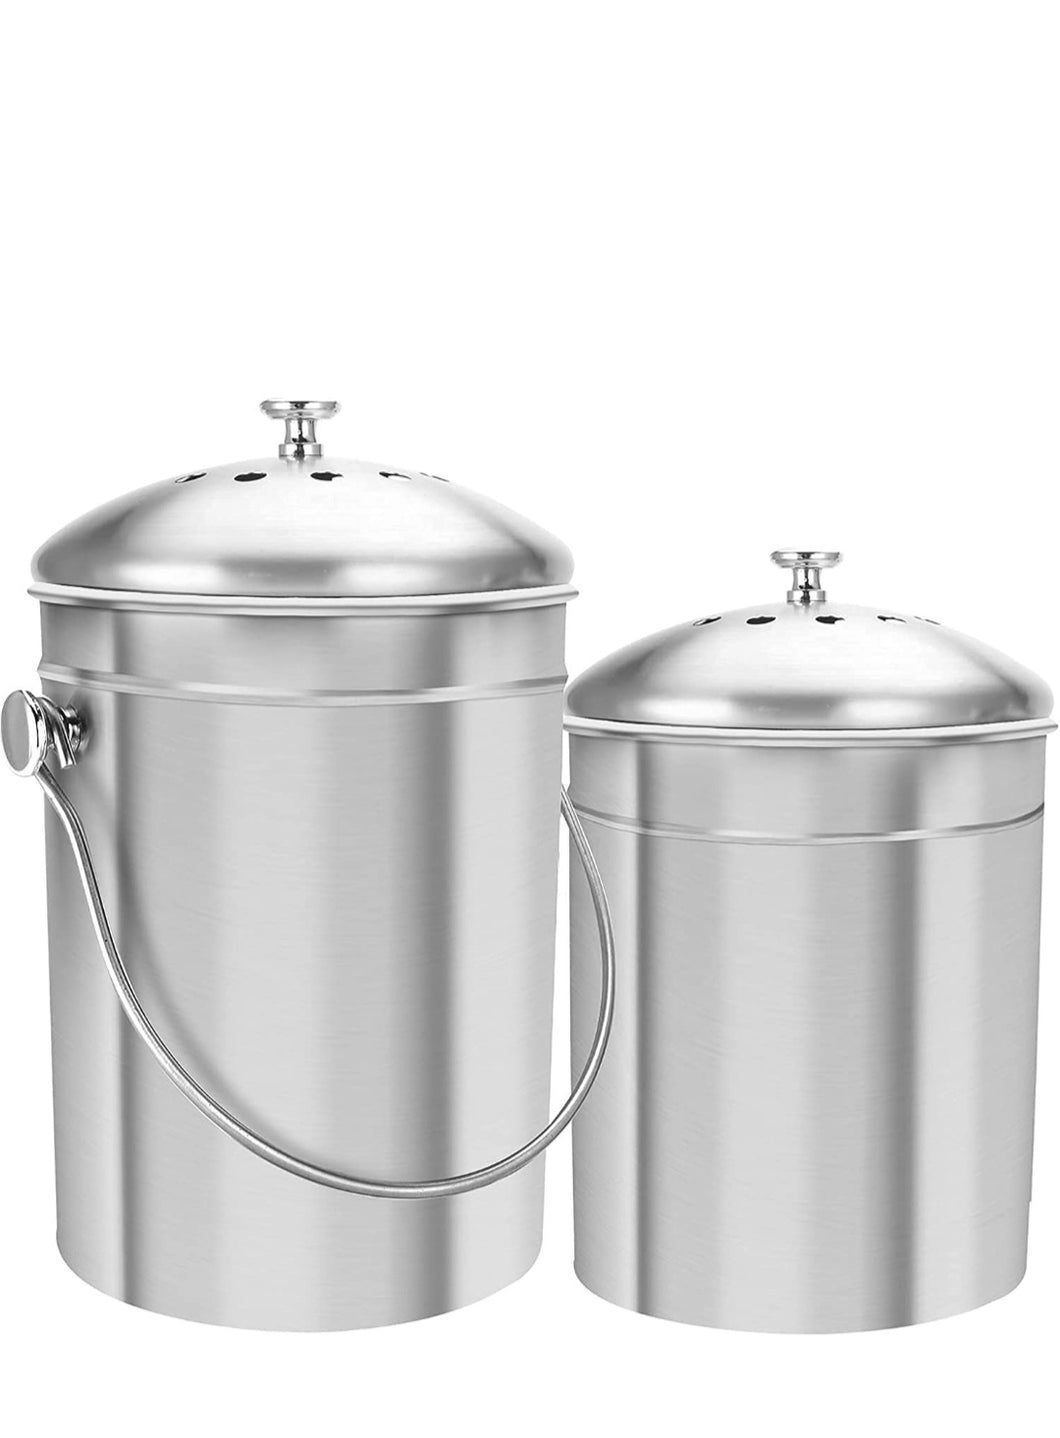 Two countertop compost pails in different sizes displayed on white background